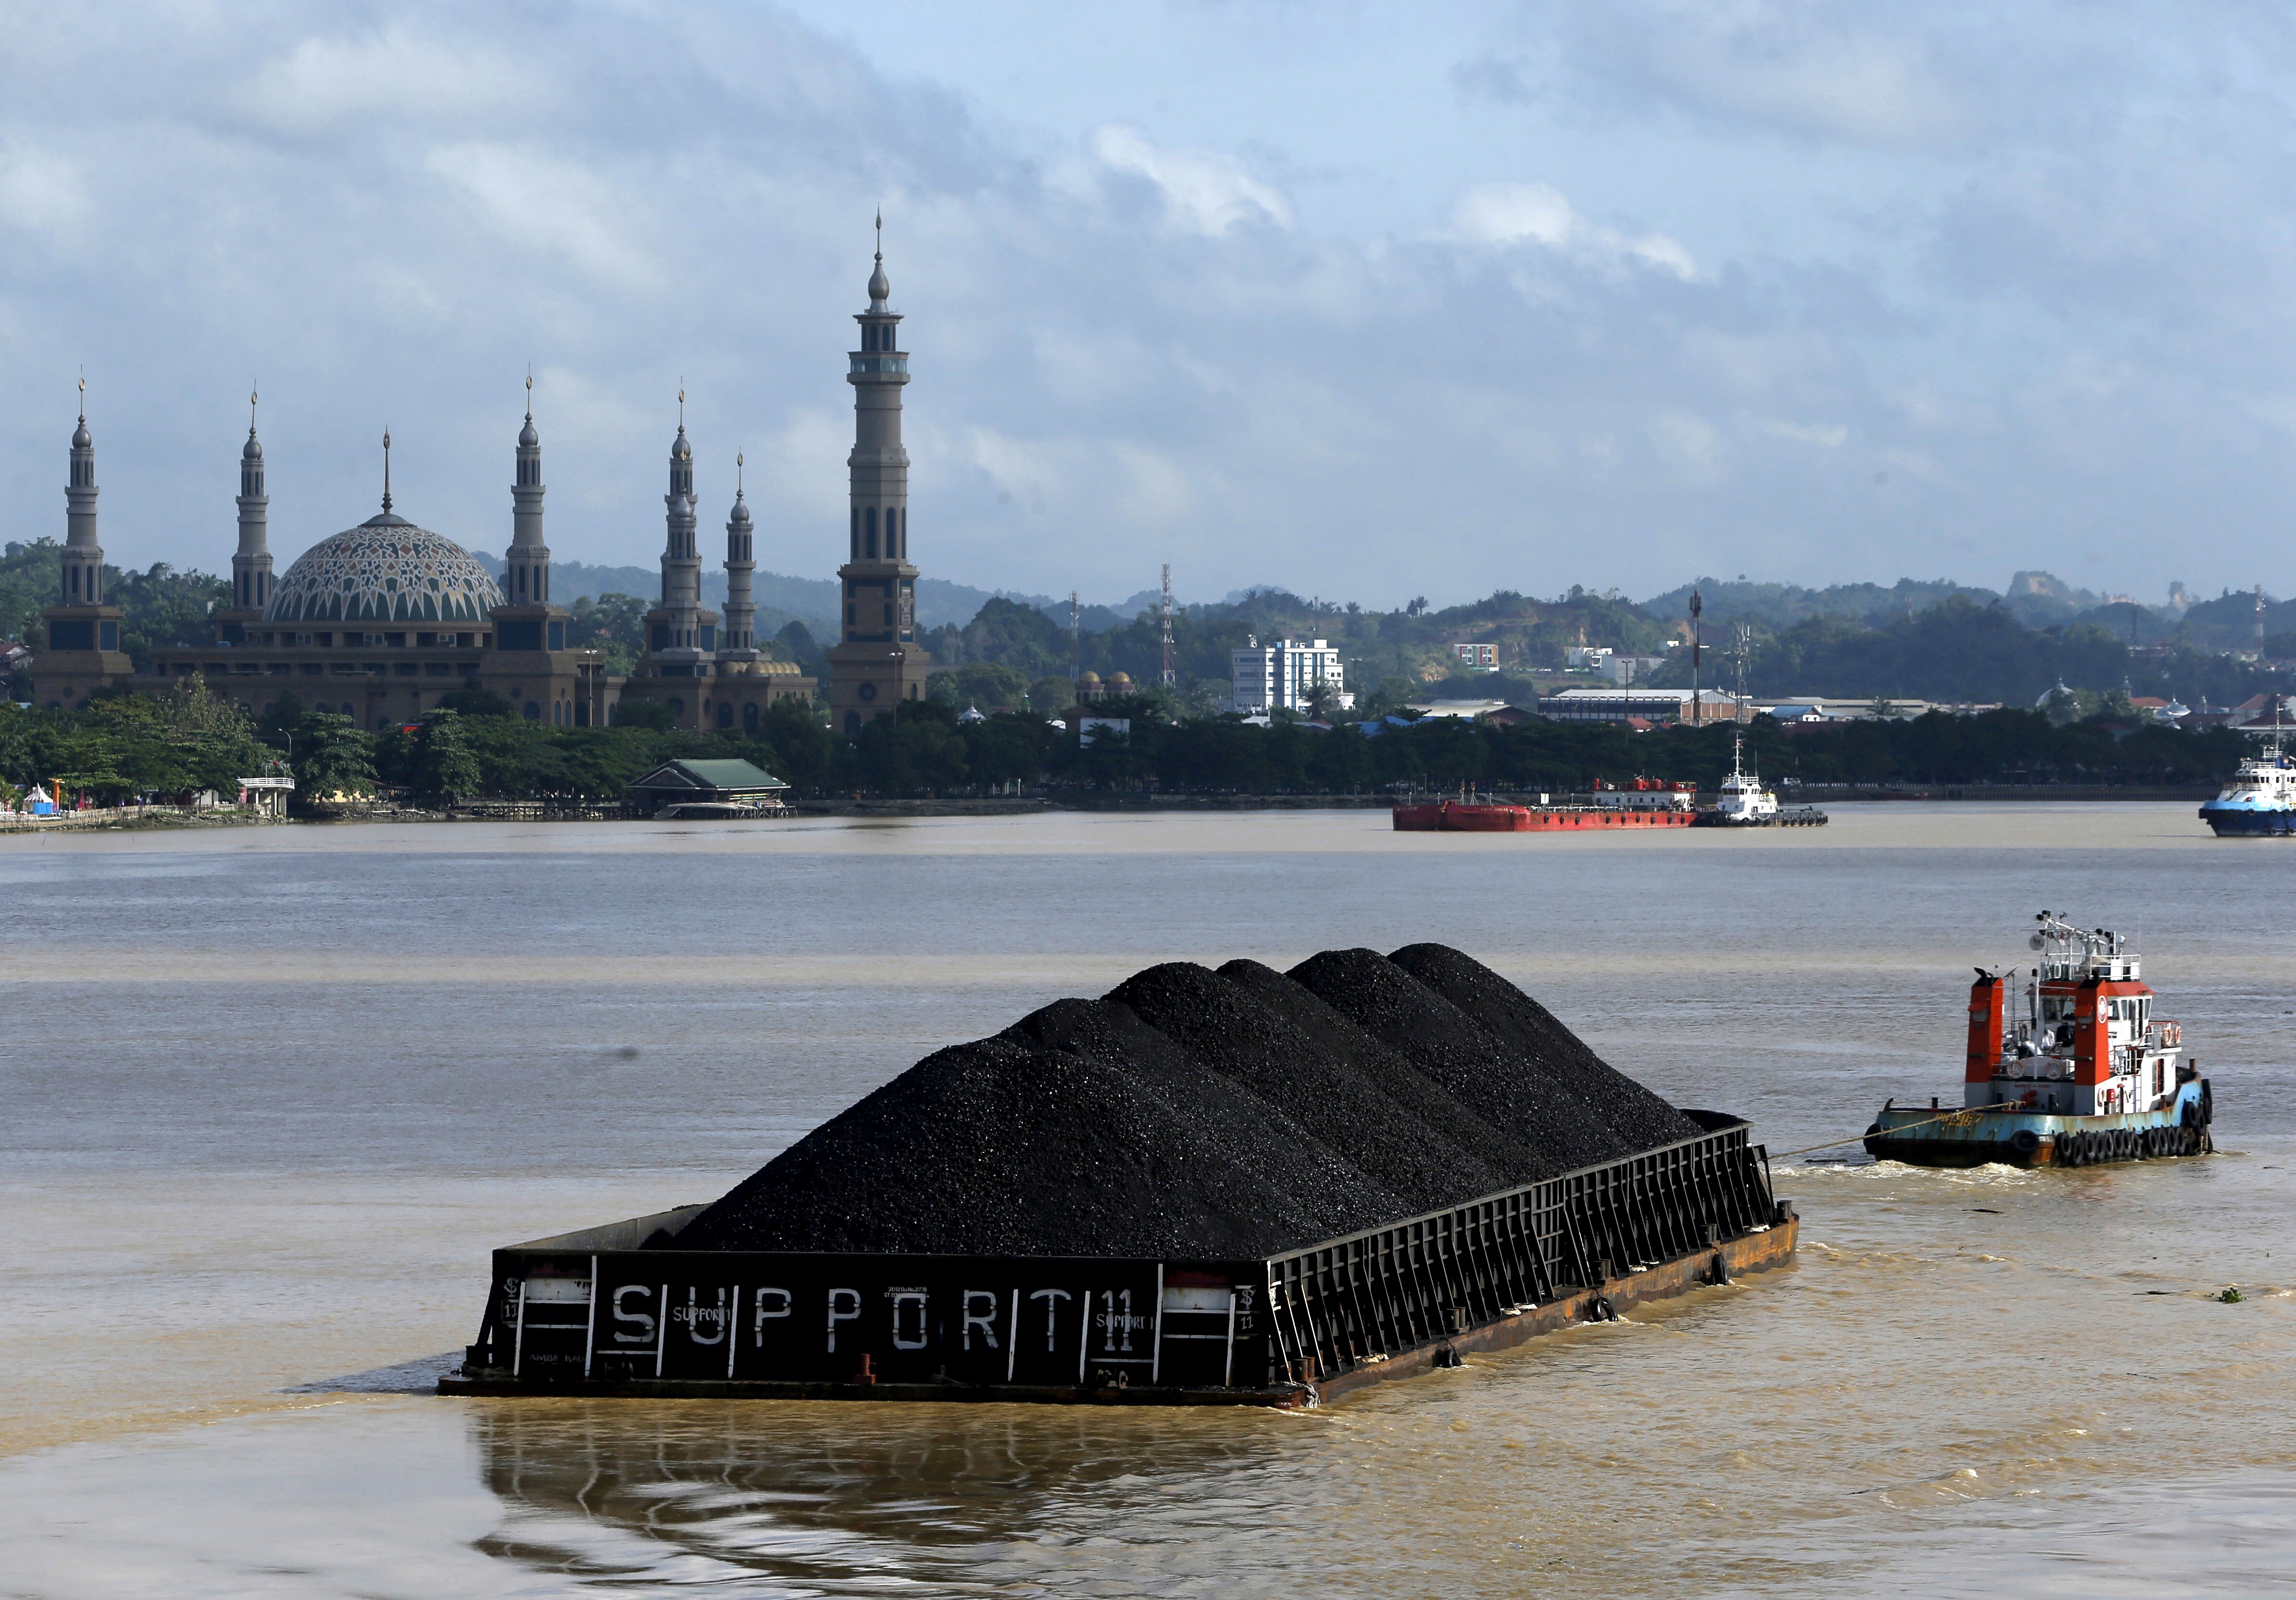 A tugboat pulls a coal barge along the Mahakam River in Samarinda, East Kalimantan, Indonesia in 2016. Indonesia must have higher standards for foreign investors as it works to meet its energy needs, or it risks being locked into a coal-dependent future. Photo: Reuters